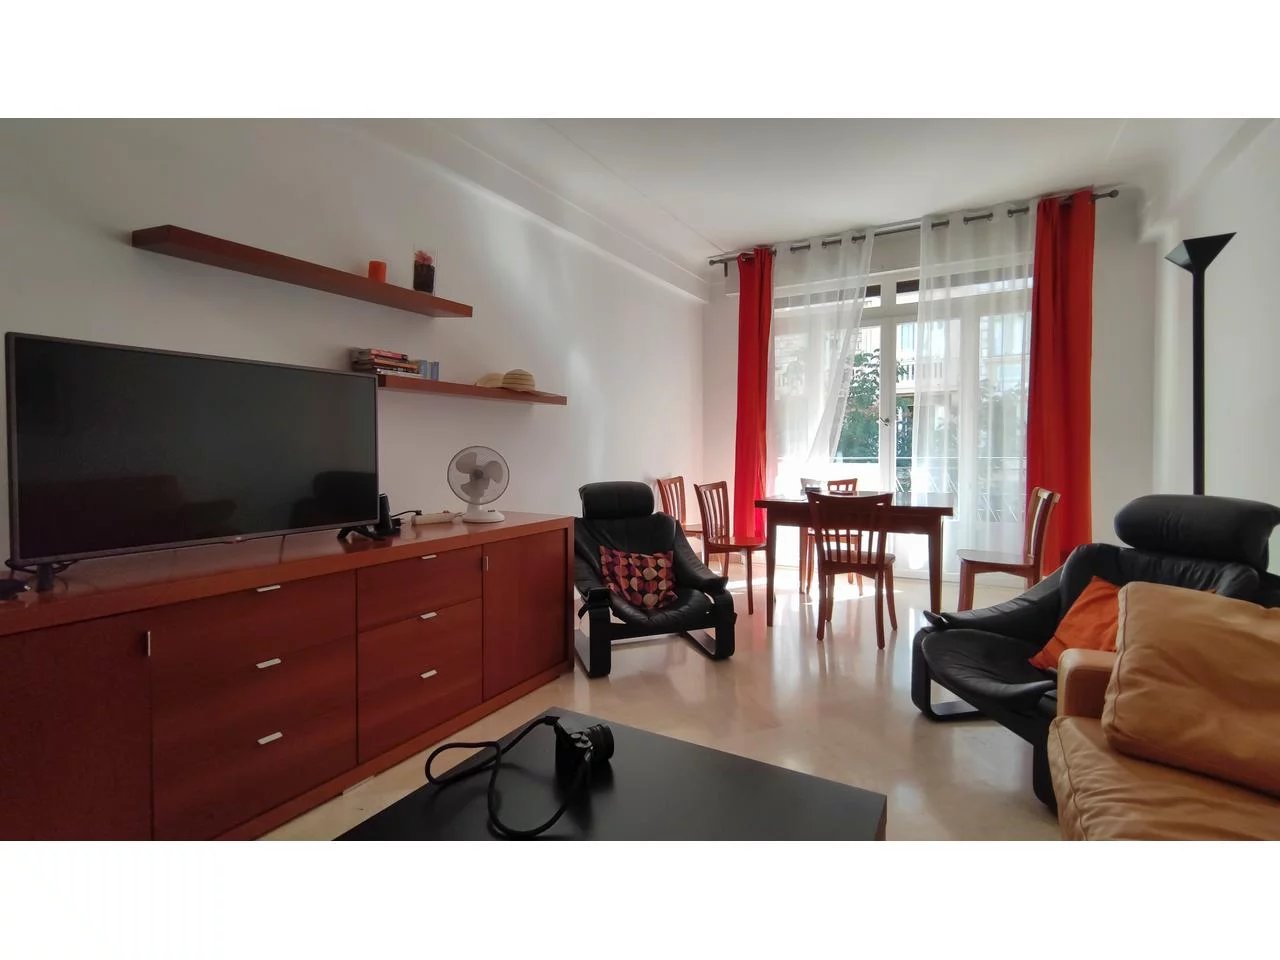 Appartement  3 Rooms 73m2  for sale   490 000 €